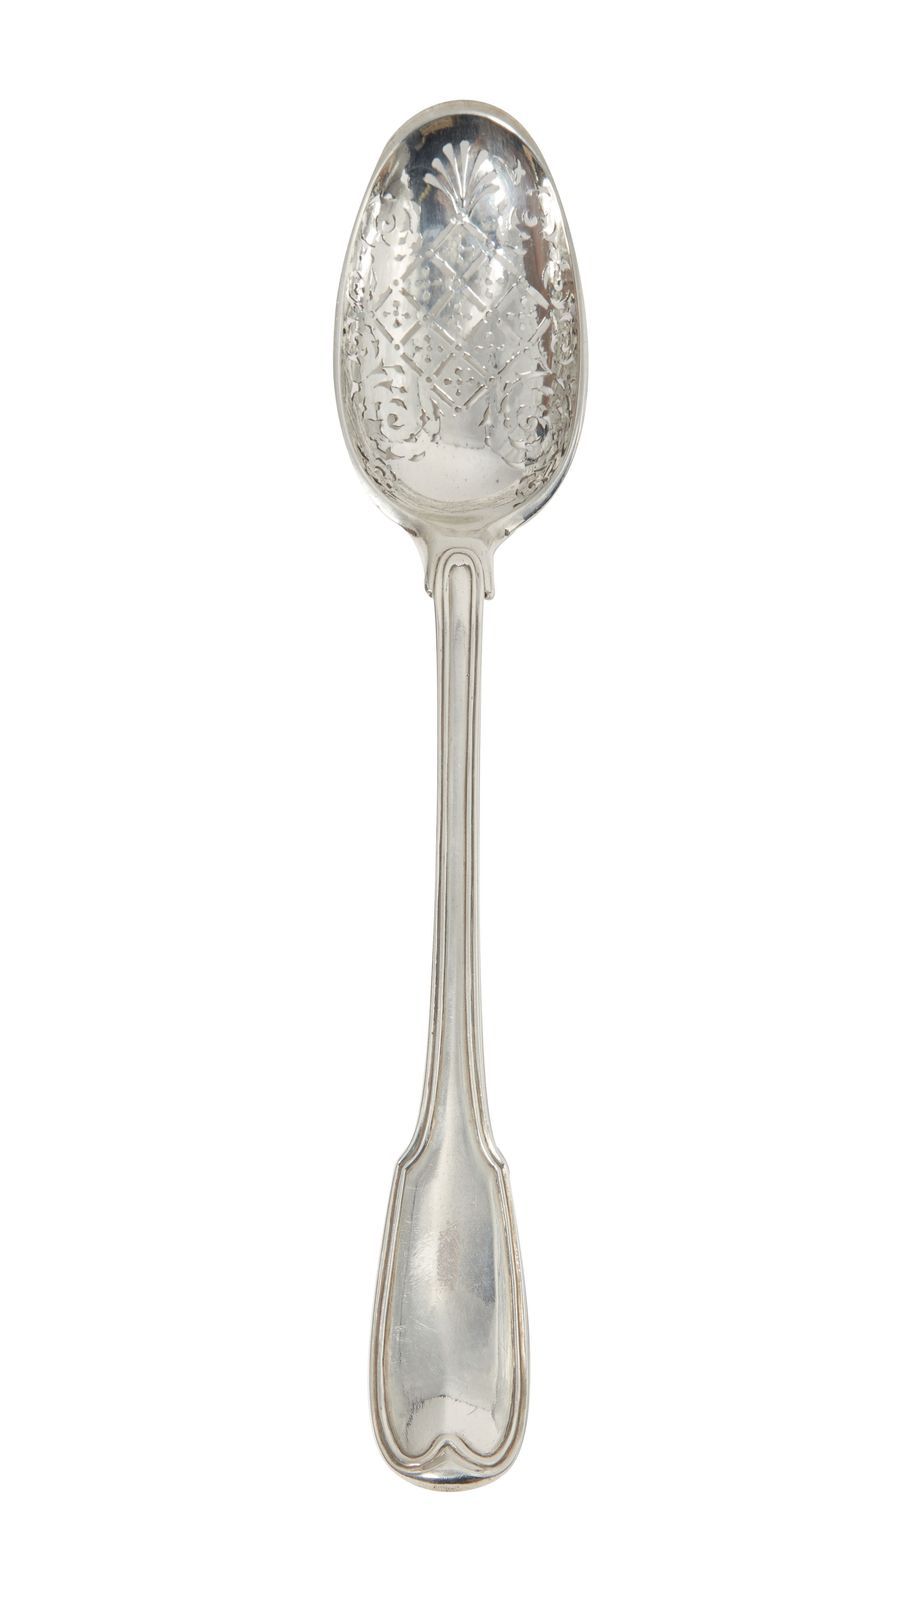 Null 8-Silver olive spoon

Perpignan, 1720-1725, Master goldsmith I. Navier 

We&hellip;